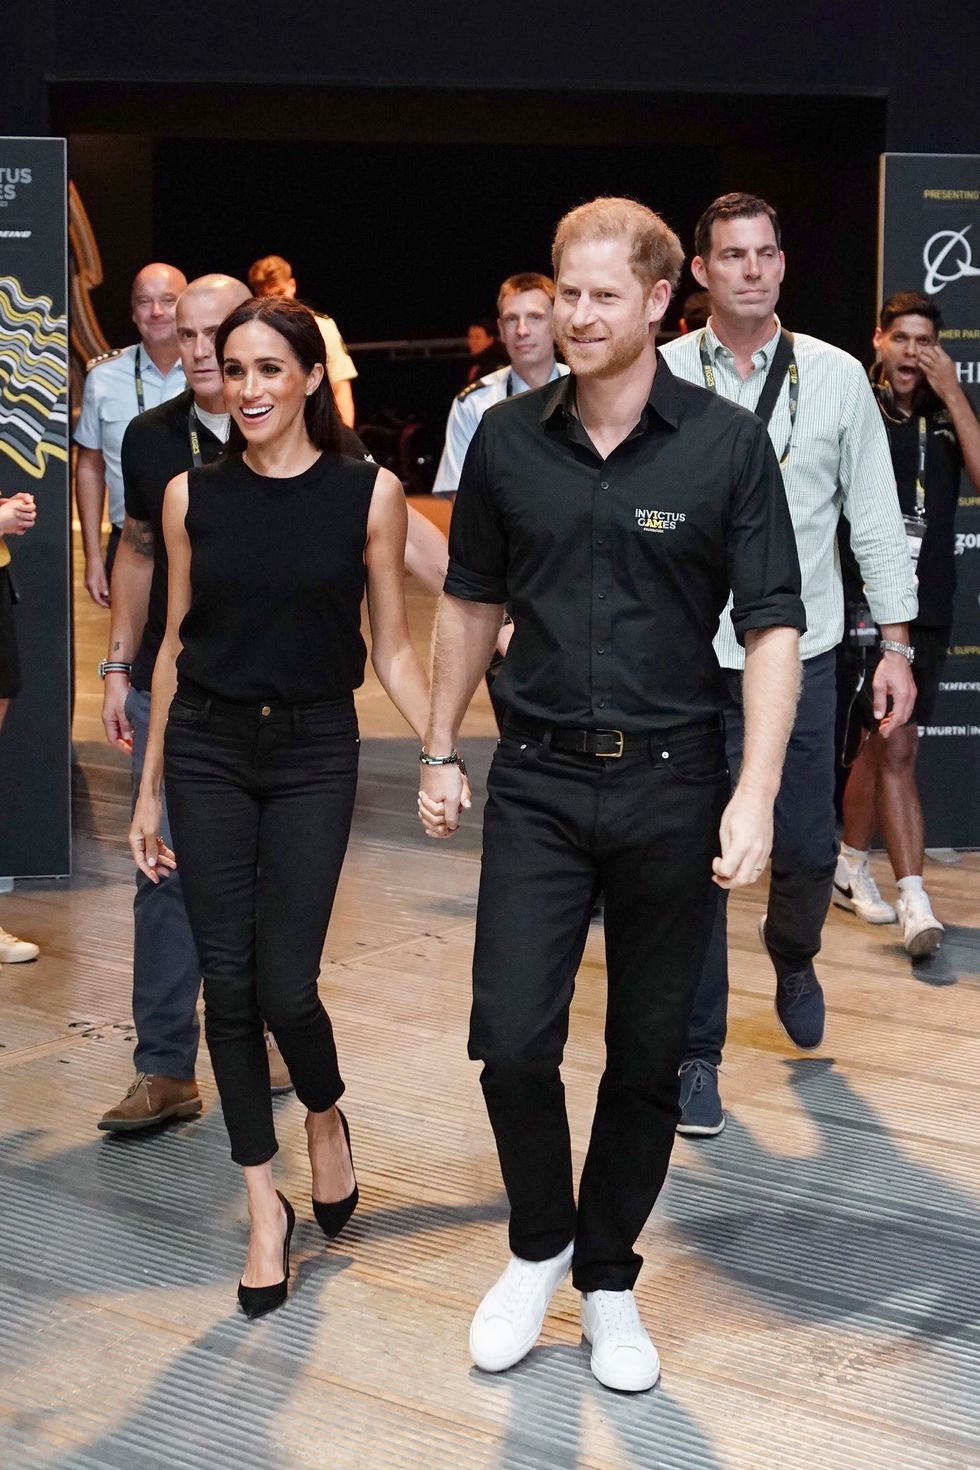 meghan markle at the invictus games